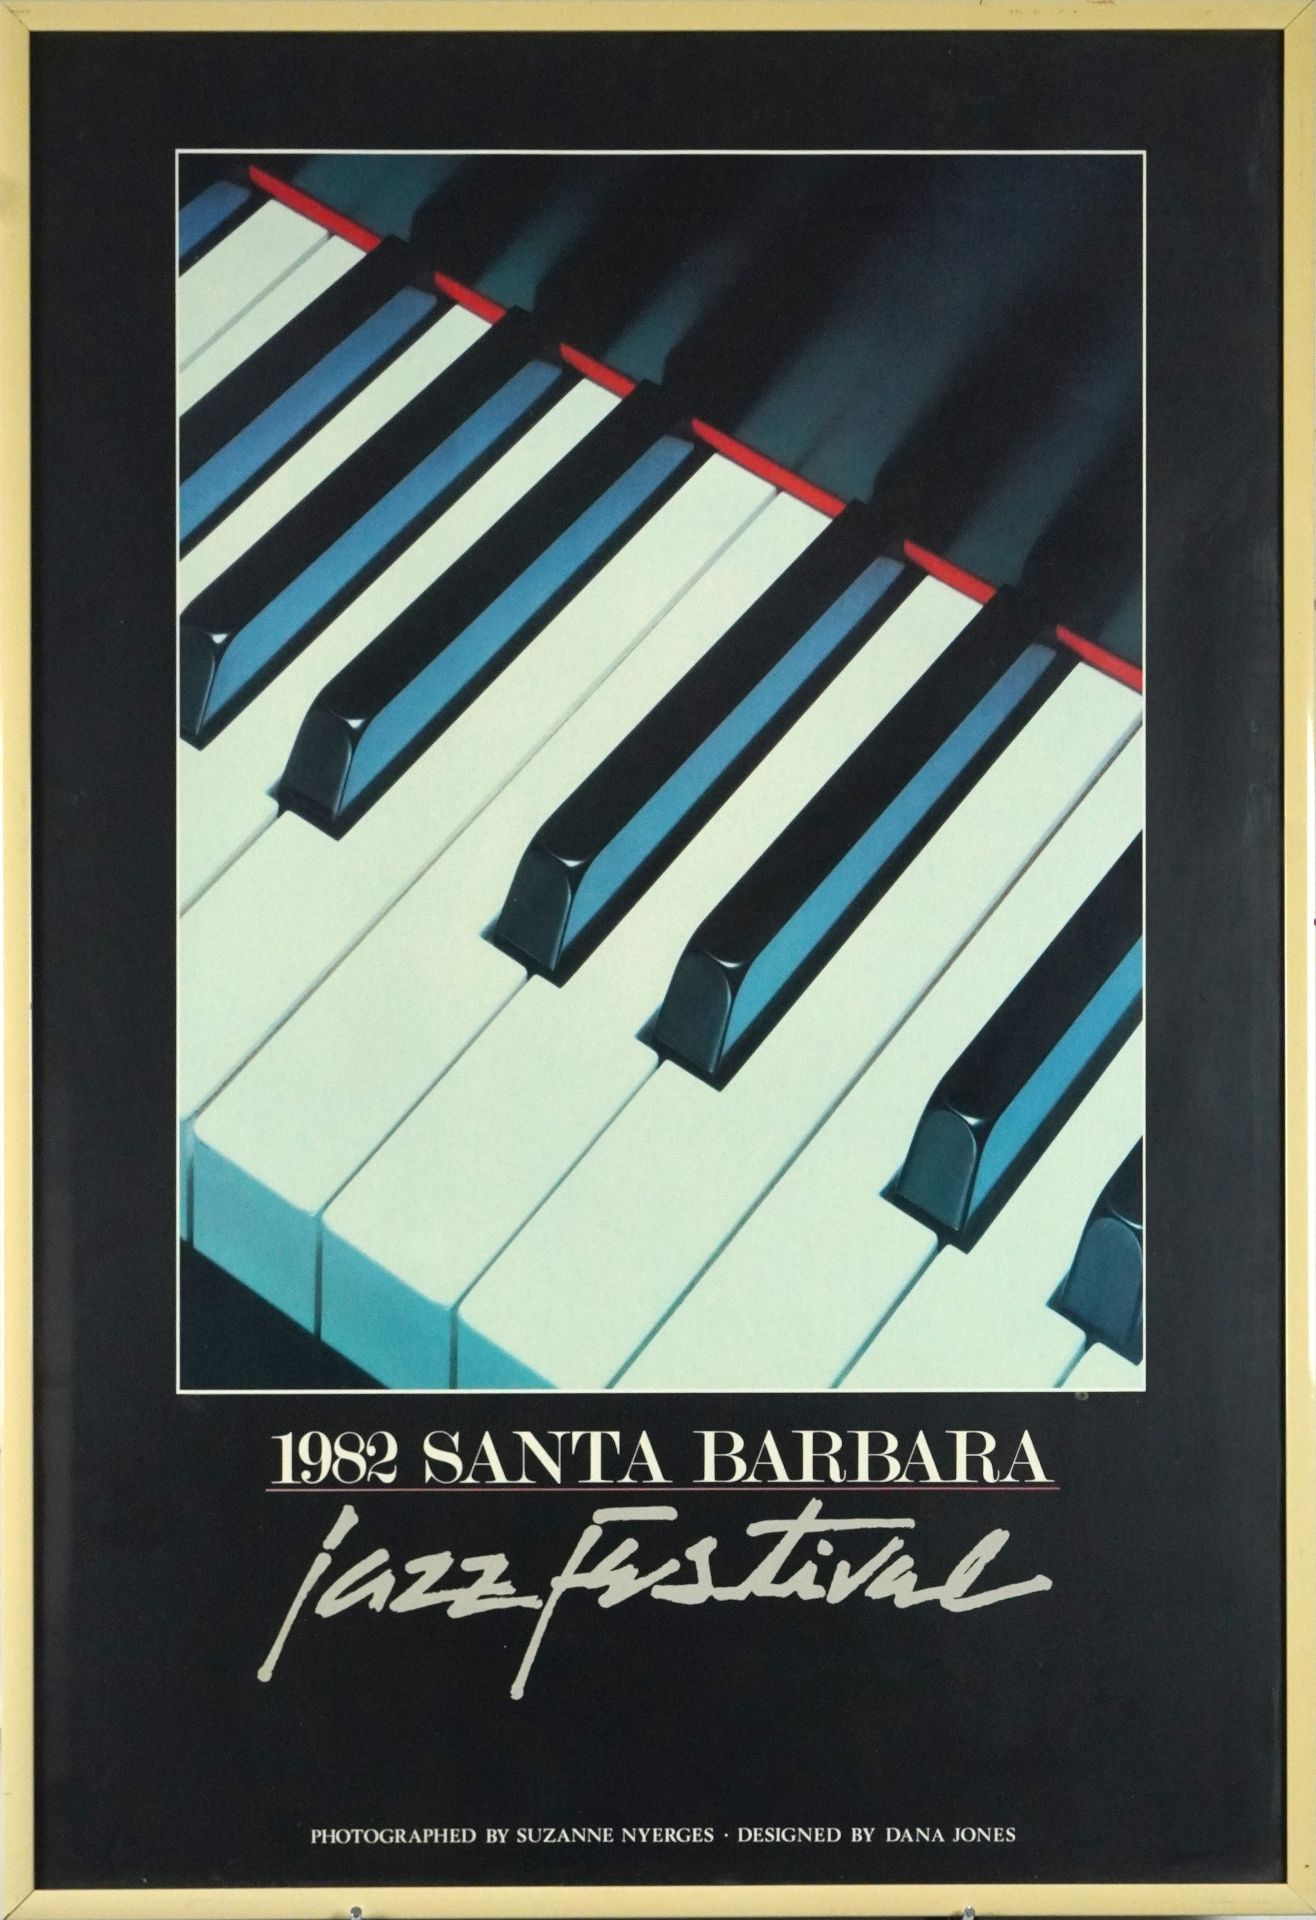 1982 Santa Barbara Jazz Festival poster photographed by Suzanne Nyerges, Designed by Dana Jones, - Image 2 of 3